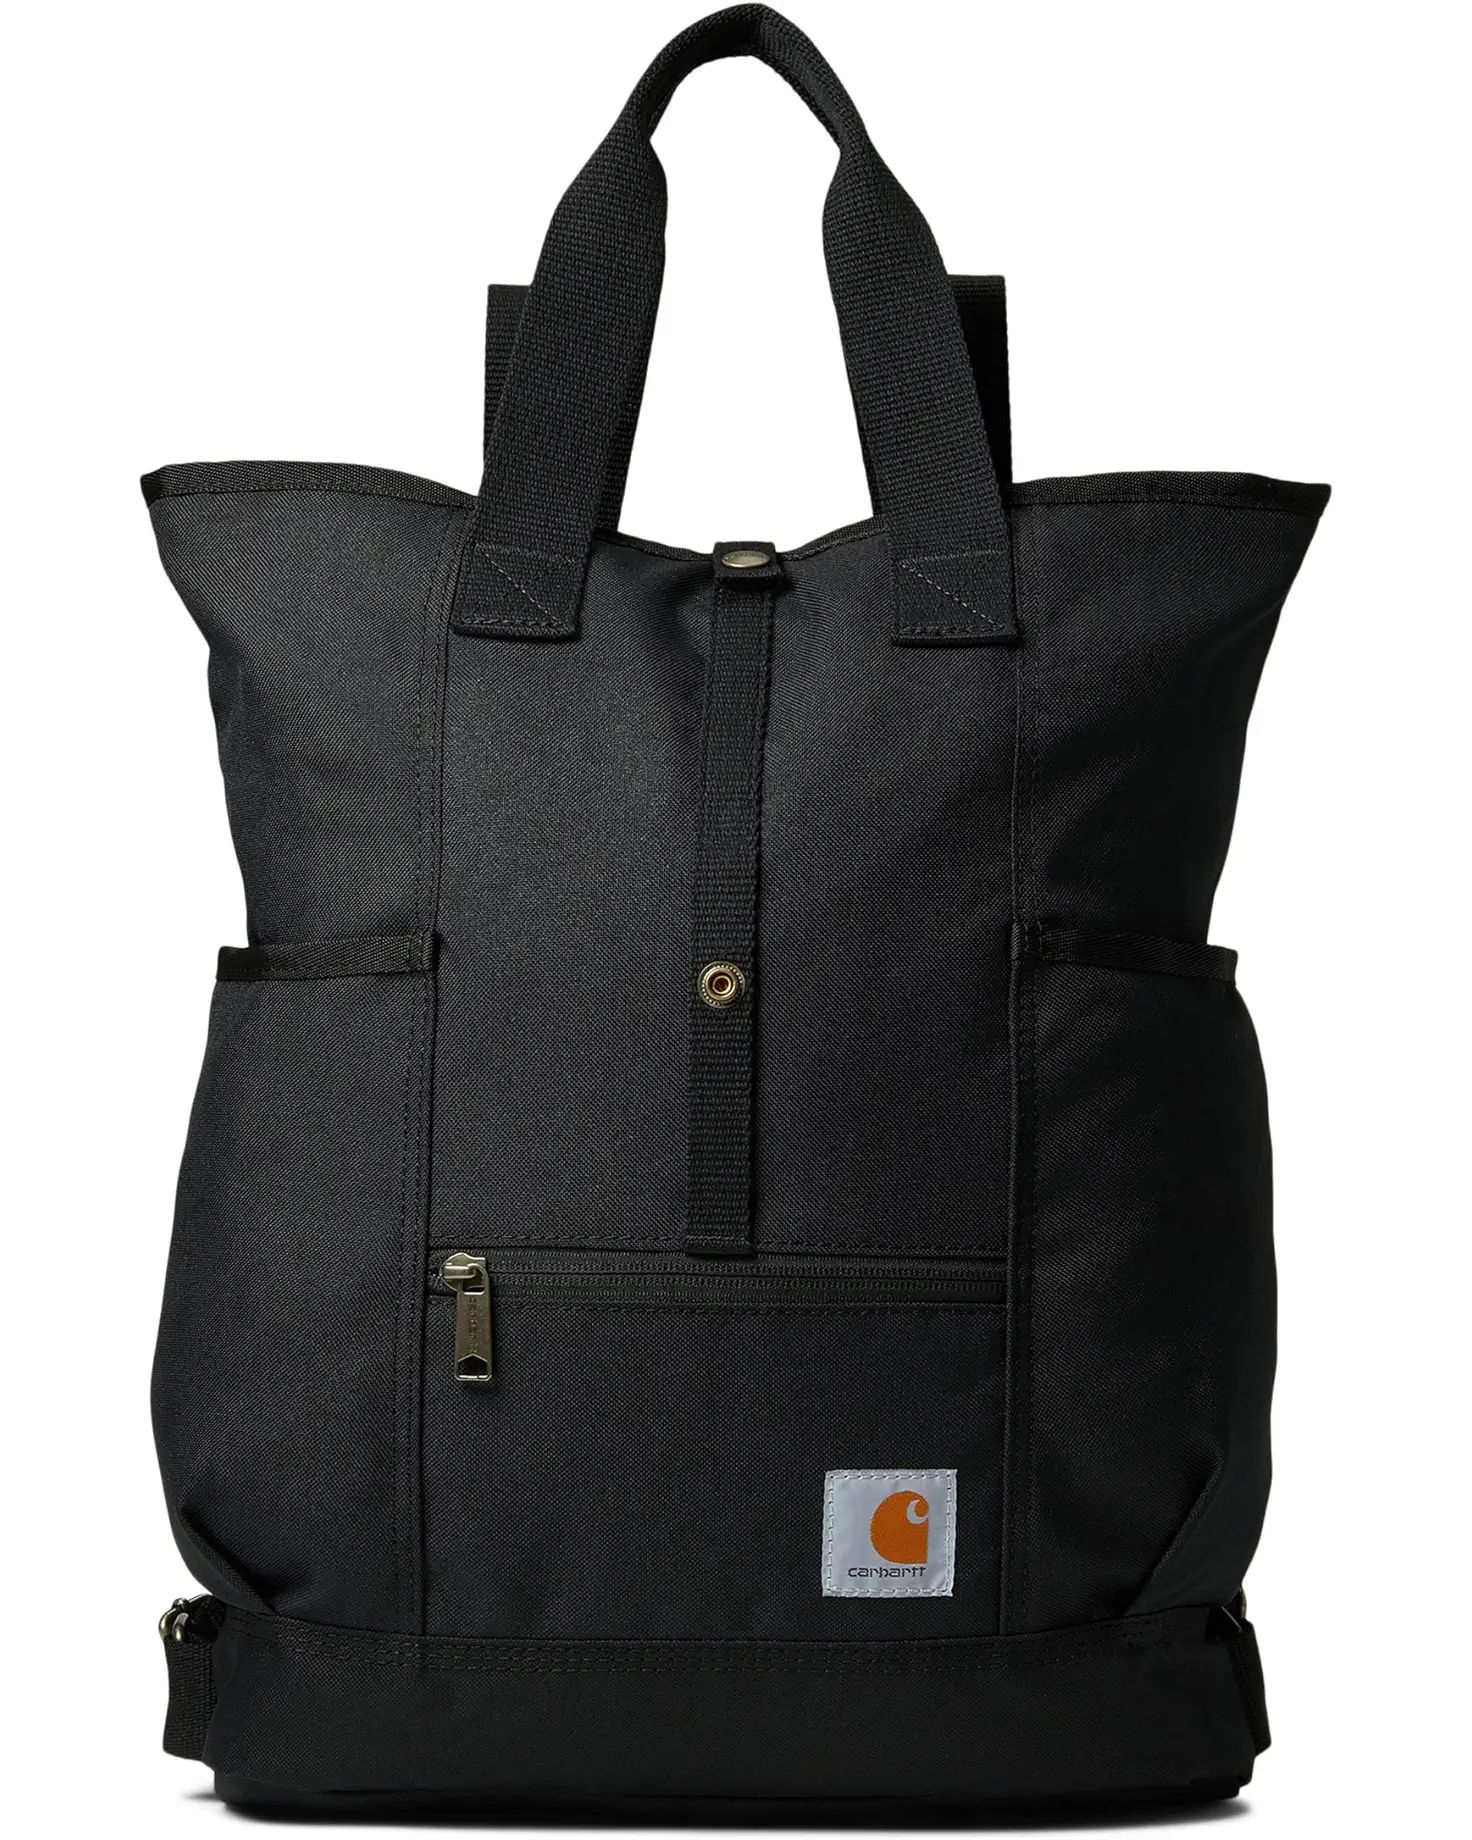 Carhartt Convertible Backpack Tote | Zappos